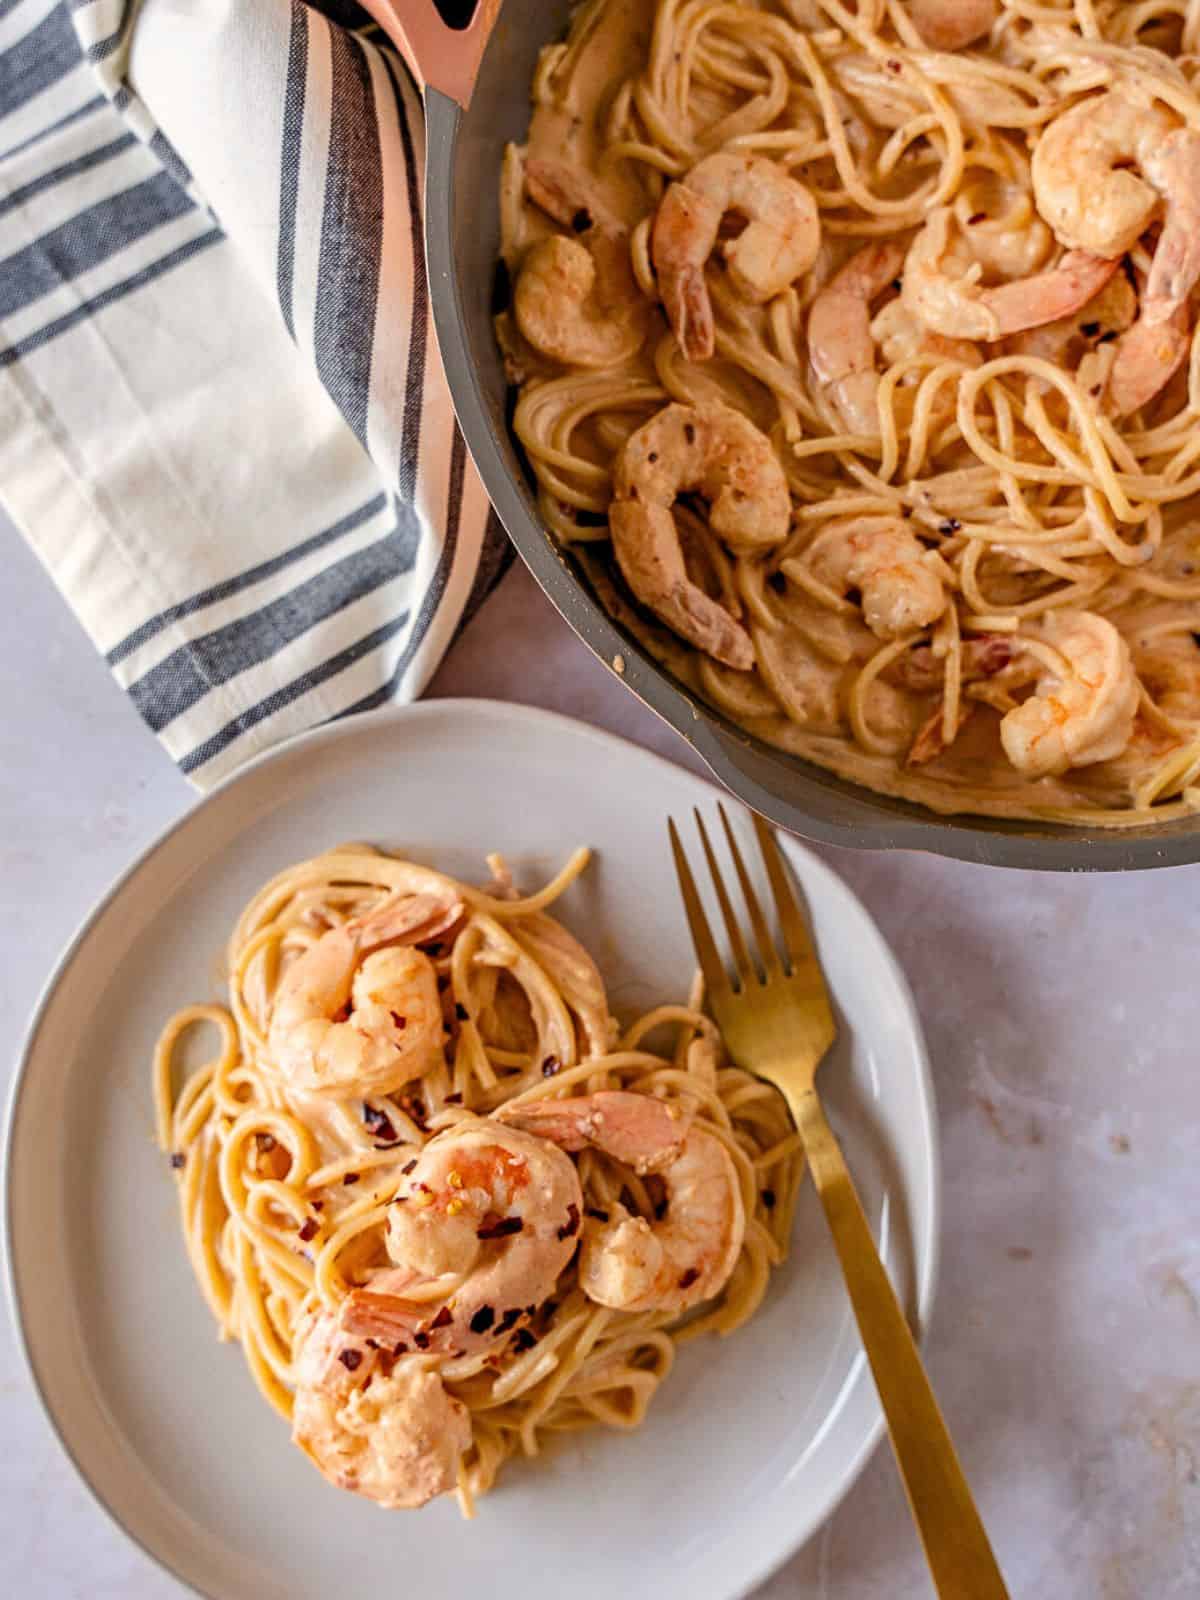 One plate of pasta with shrimp and a skillet with more spicy creamy pasta.